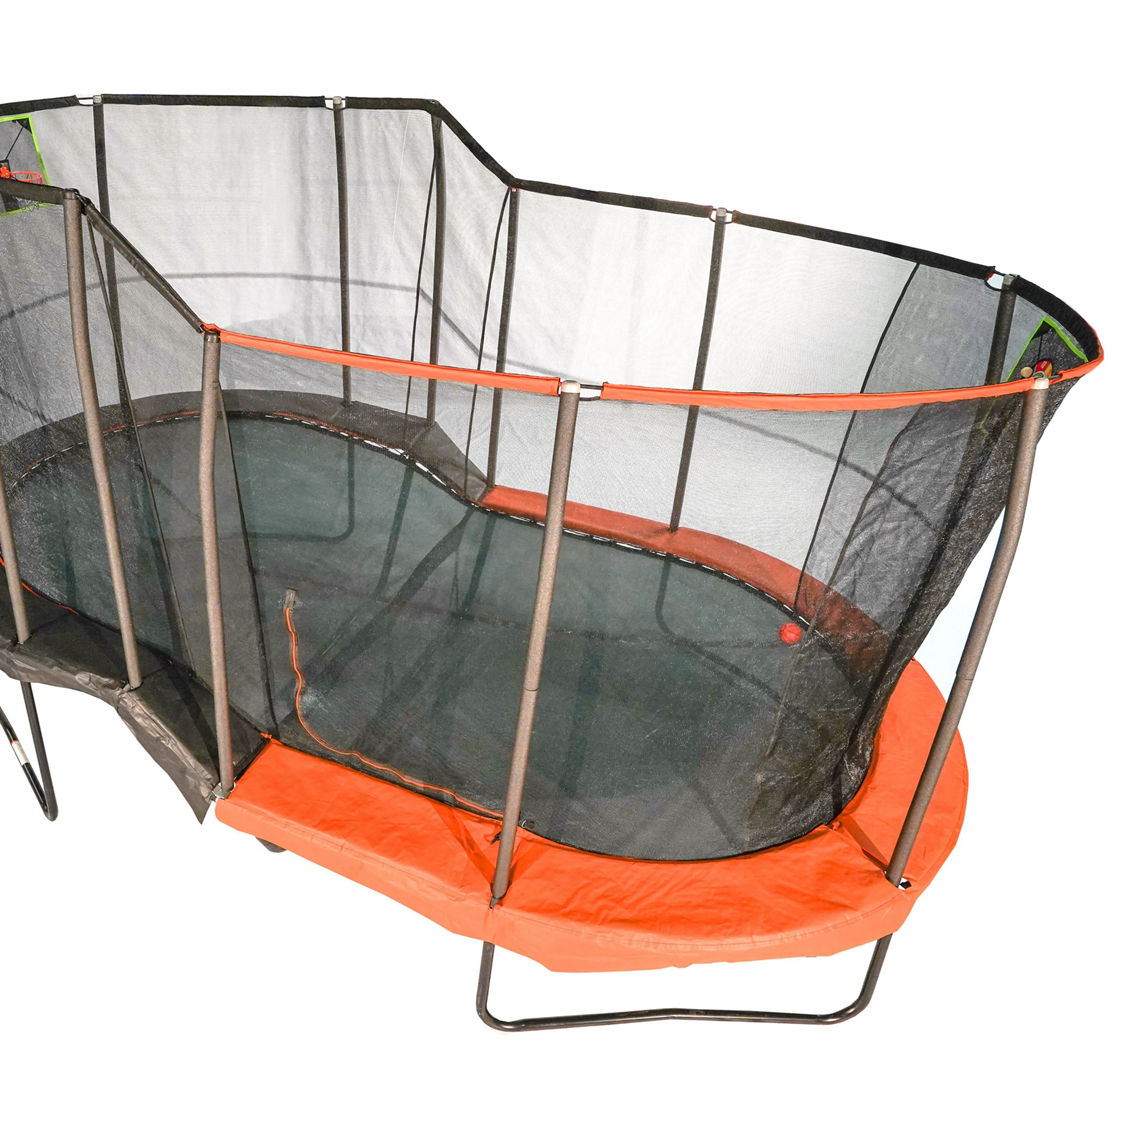 JumpKing 10' x 17' Multi-Level Oval Trampoline With Hoop & Target Game - Image 2 of 5